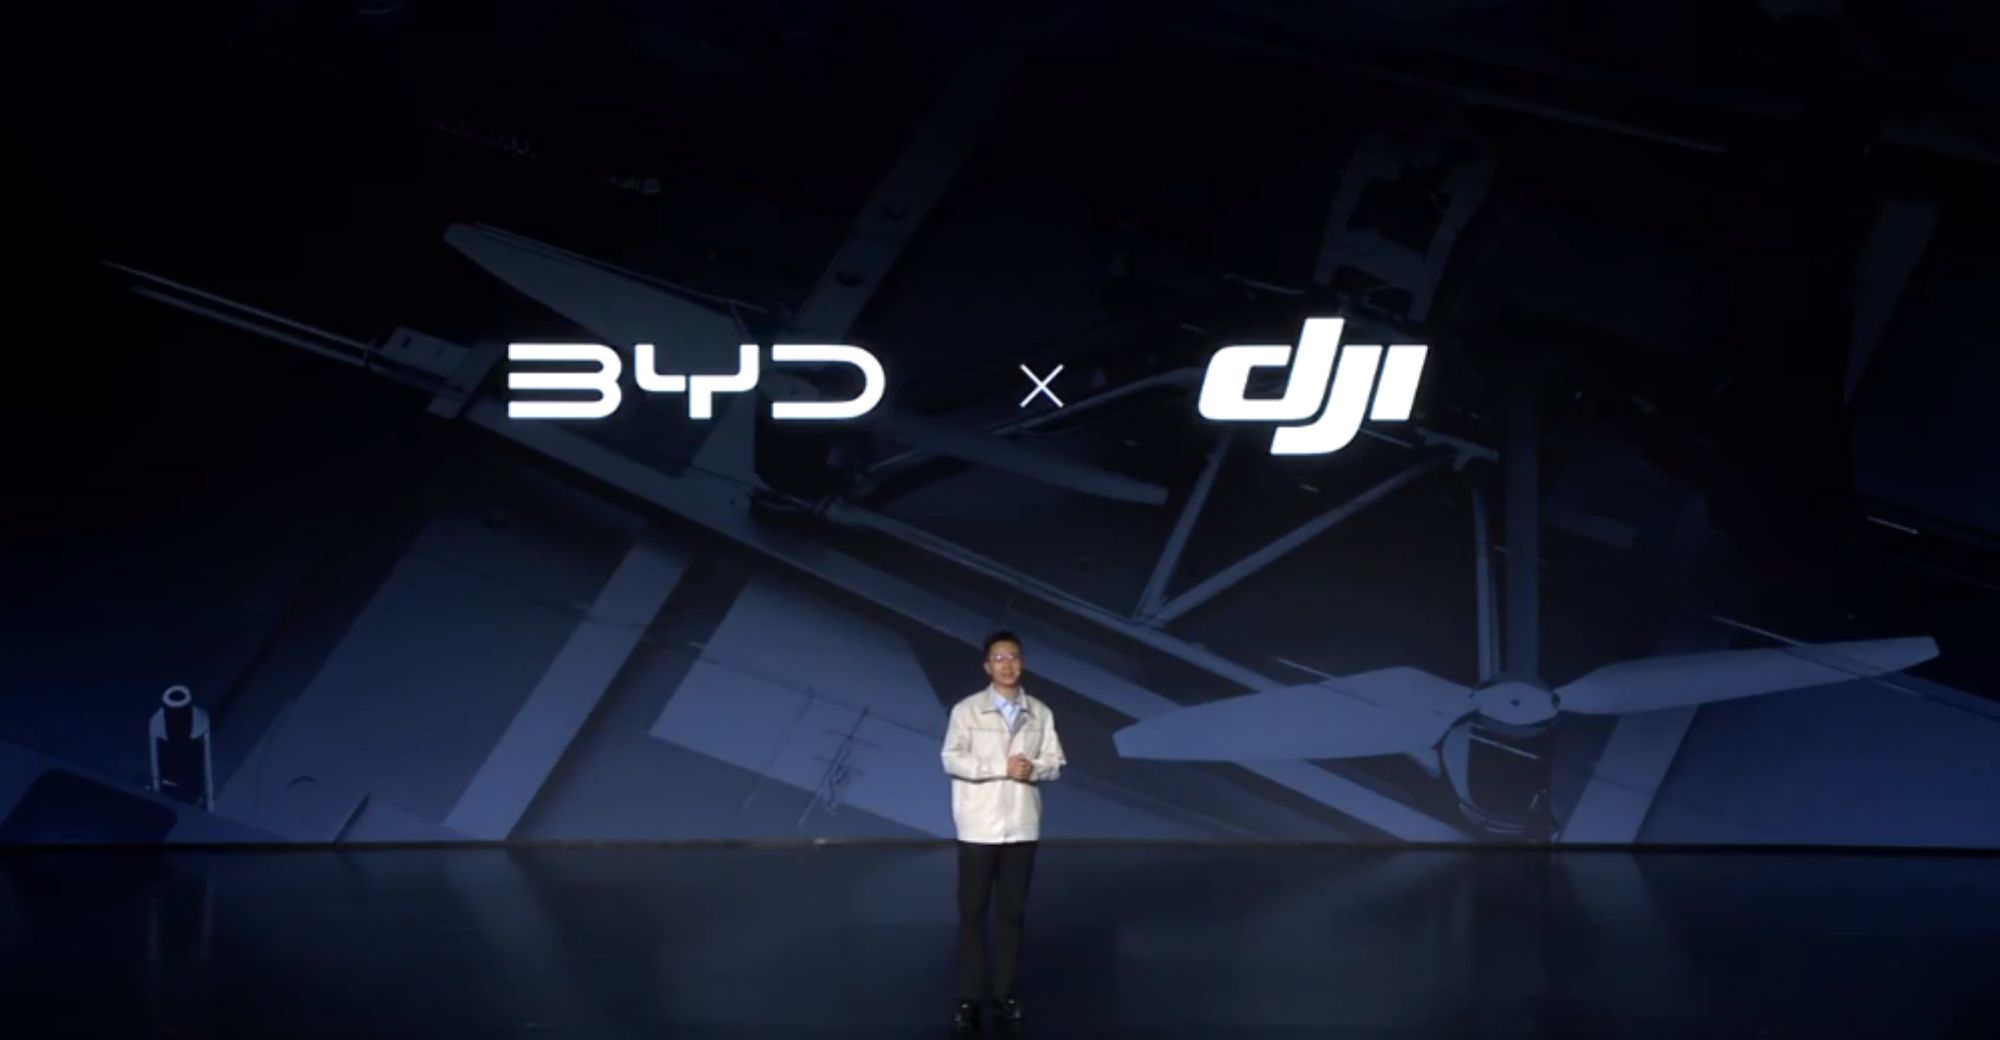 BYD and DJI Jointly Launch the World’s First Vehicle-Integrated UAS